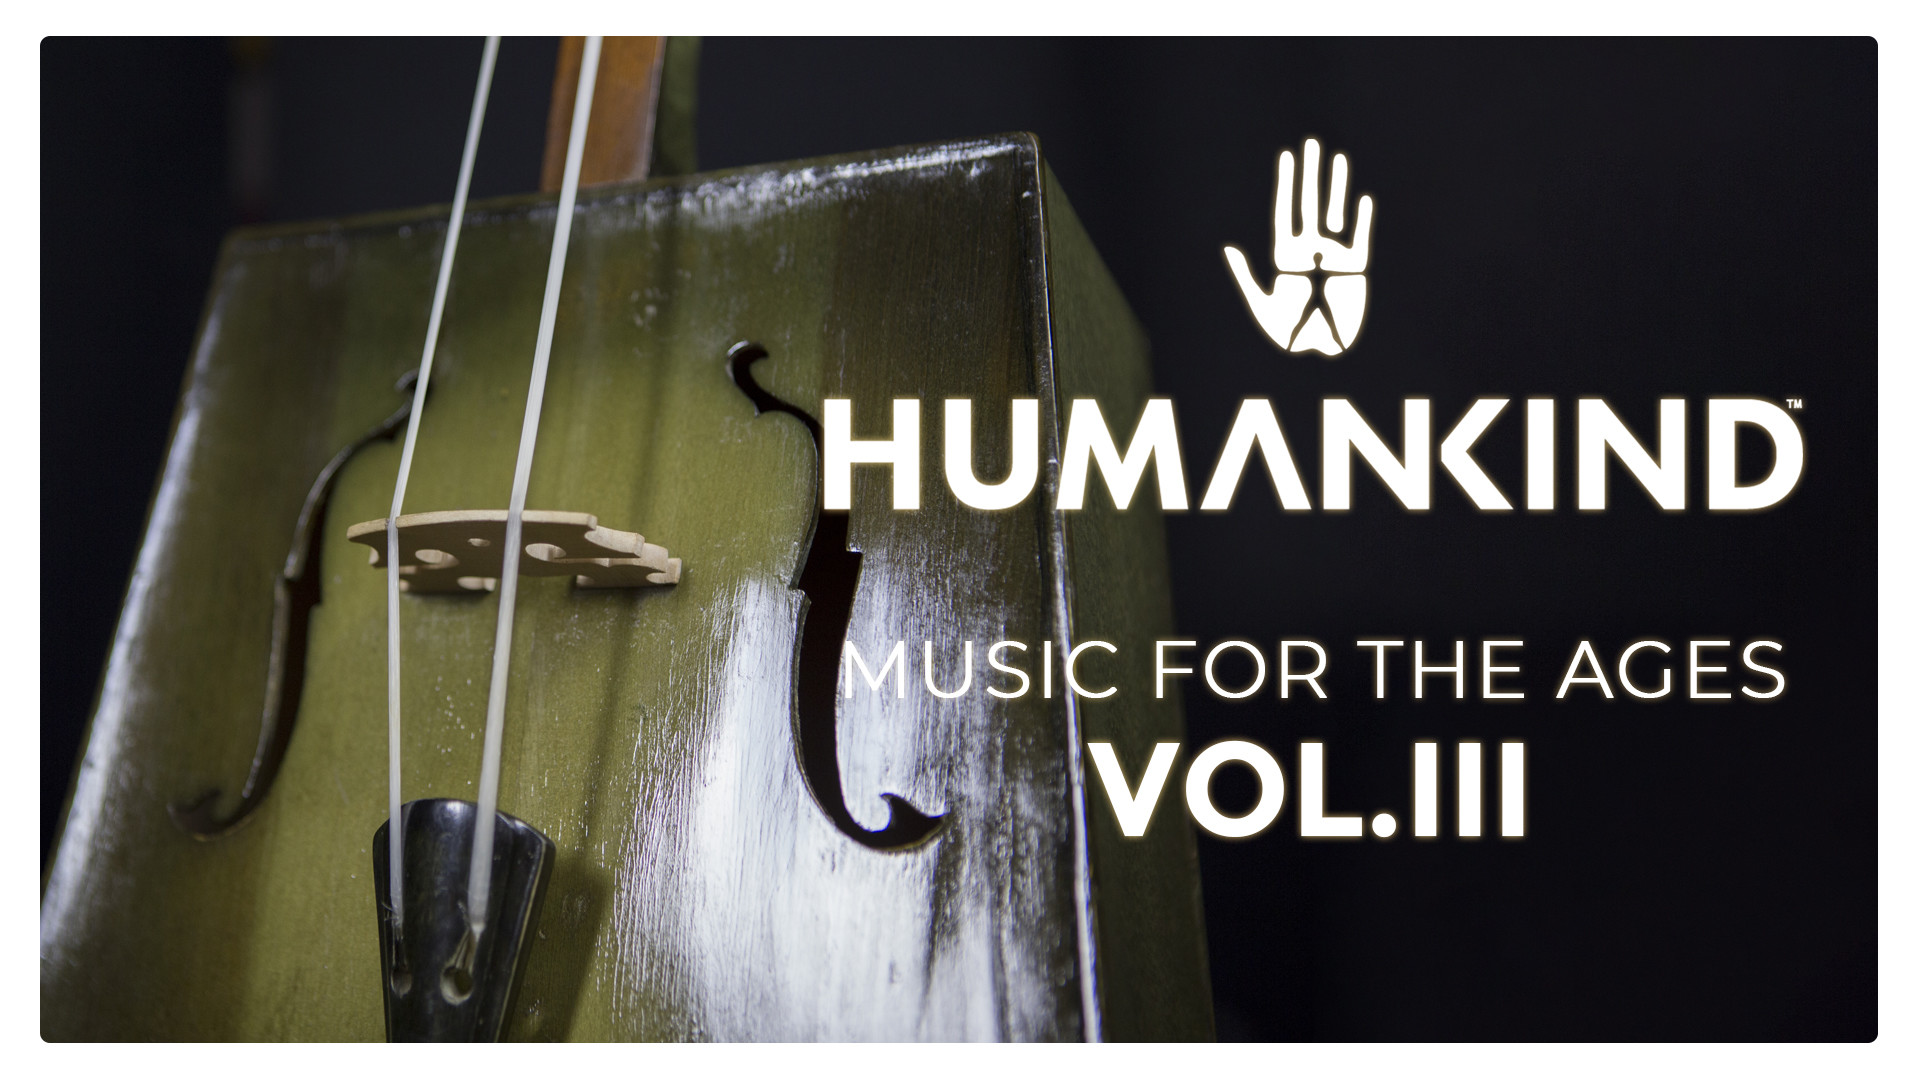 HUMANKIND™ - Music for the Ages, Vol. III Featured Screenshot #1